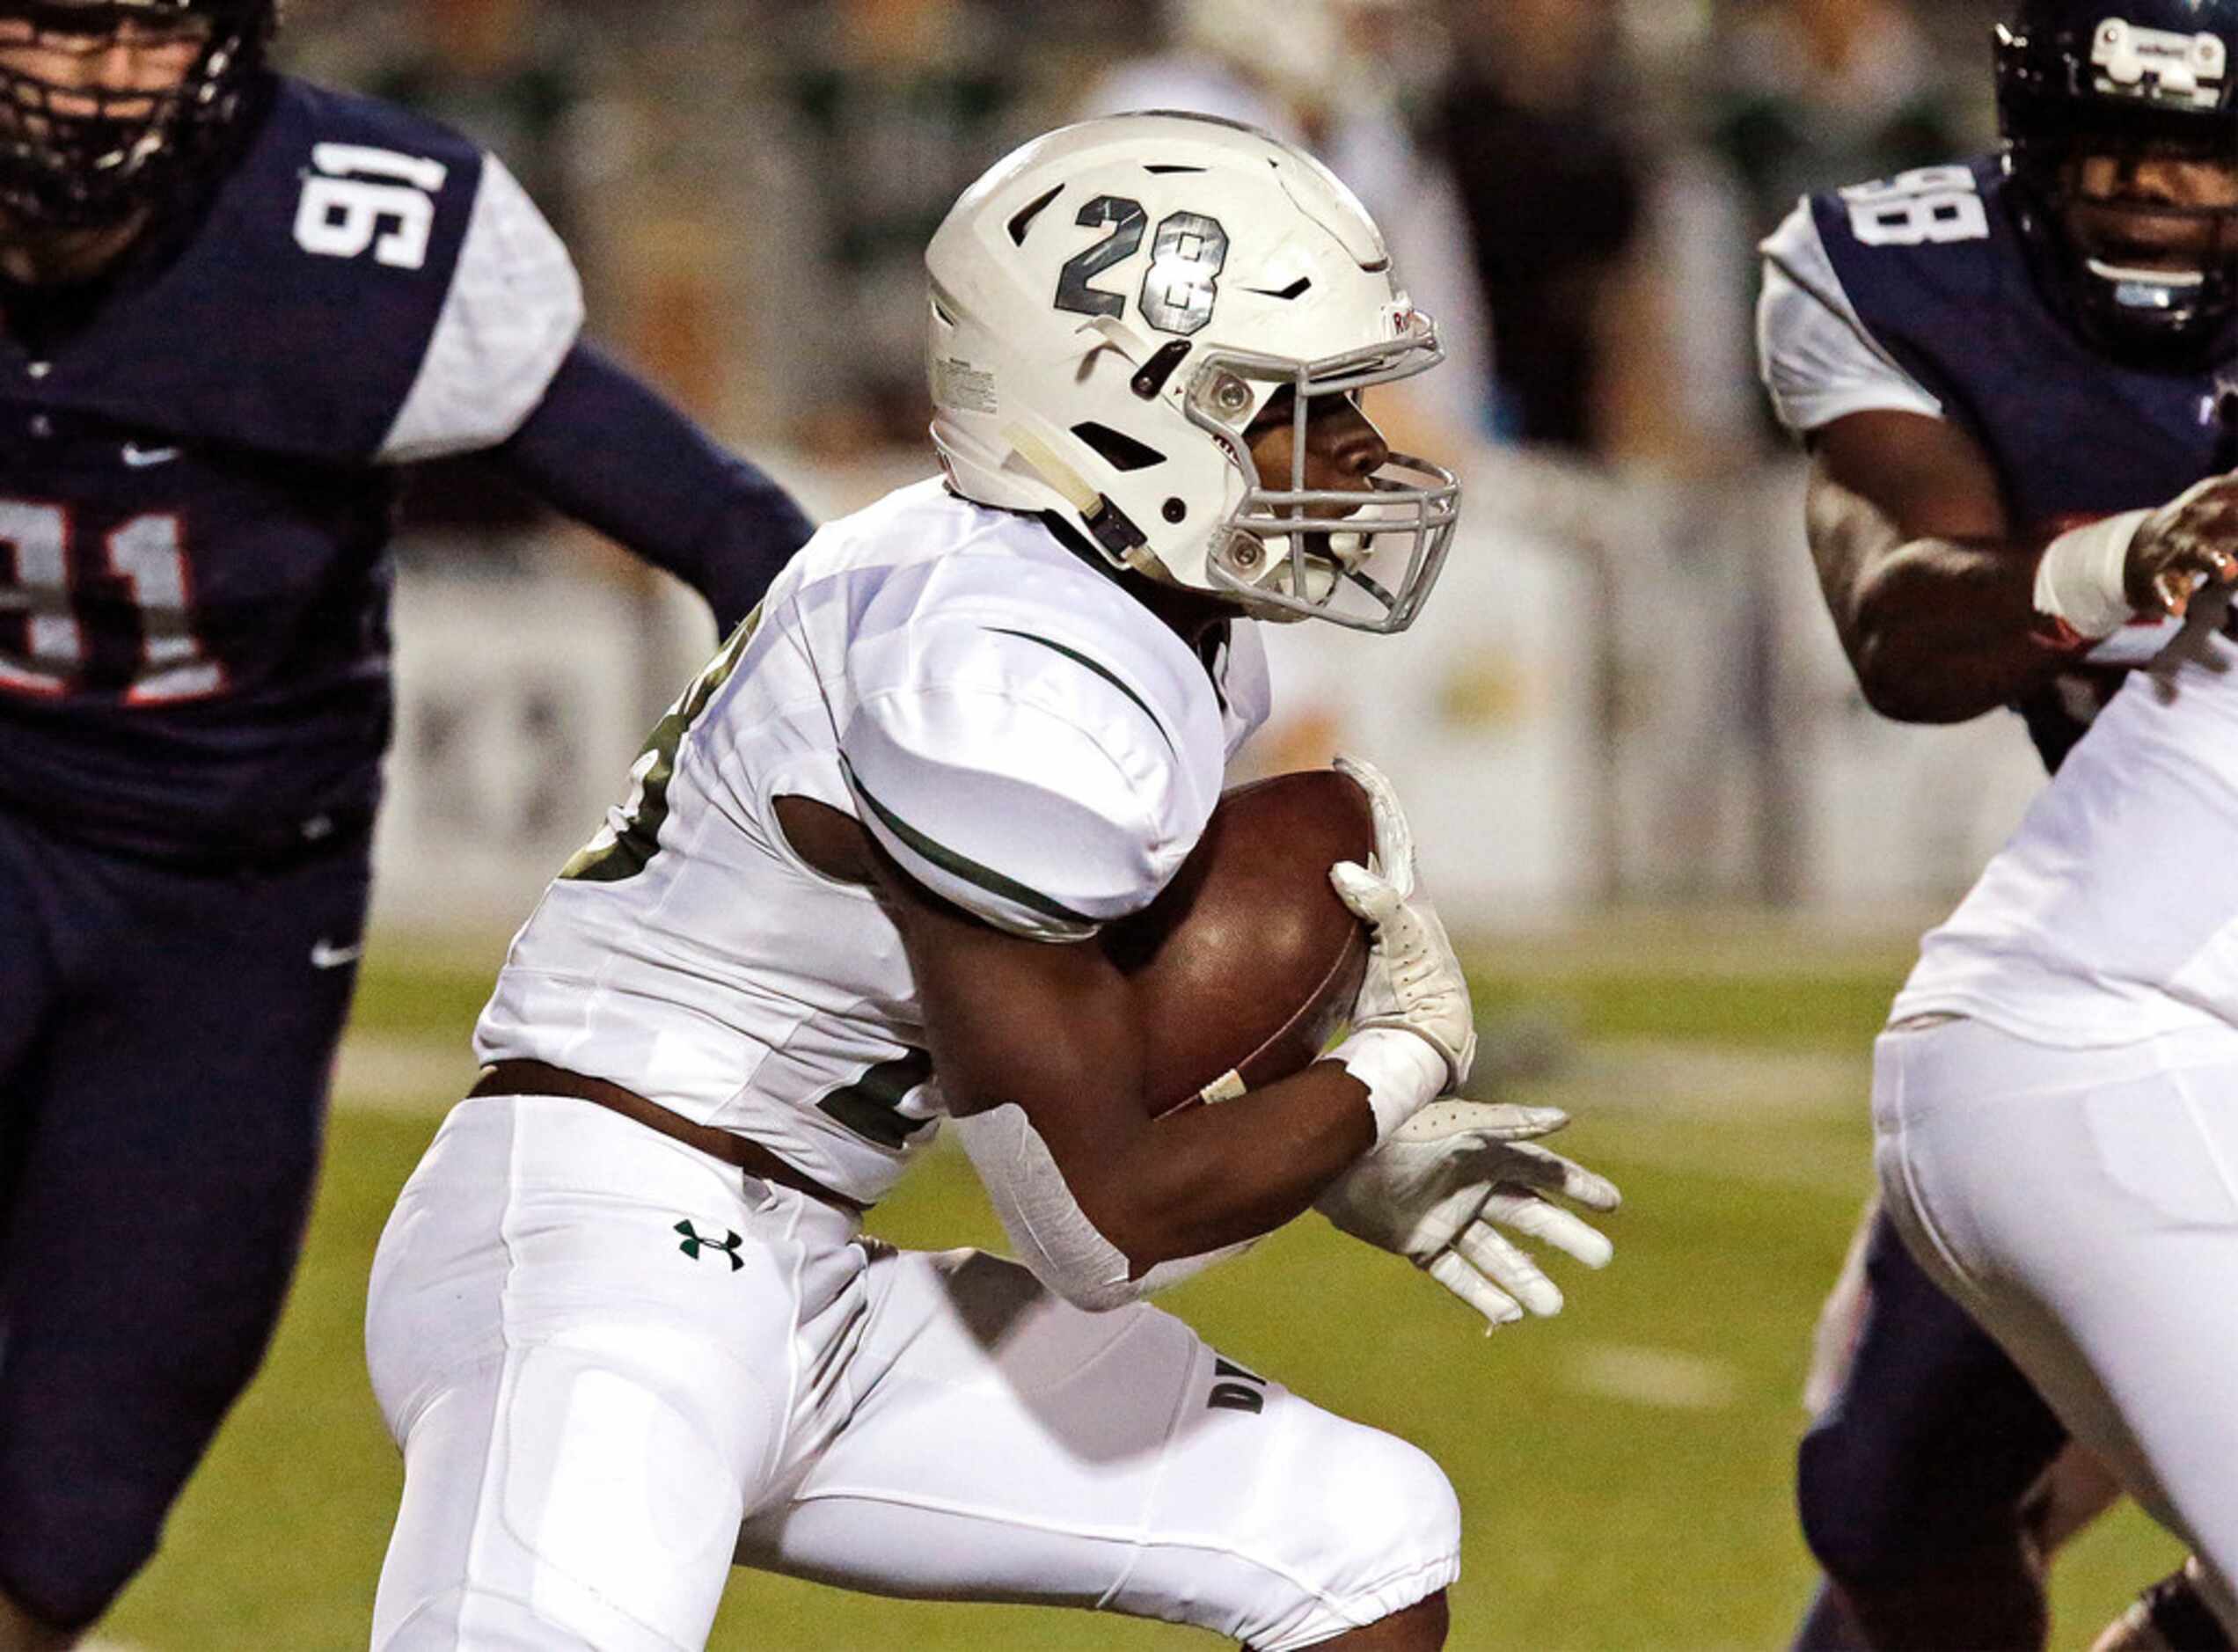 Prosper High School running back J.T. Lane (28) carries the ball during the first half as...